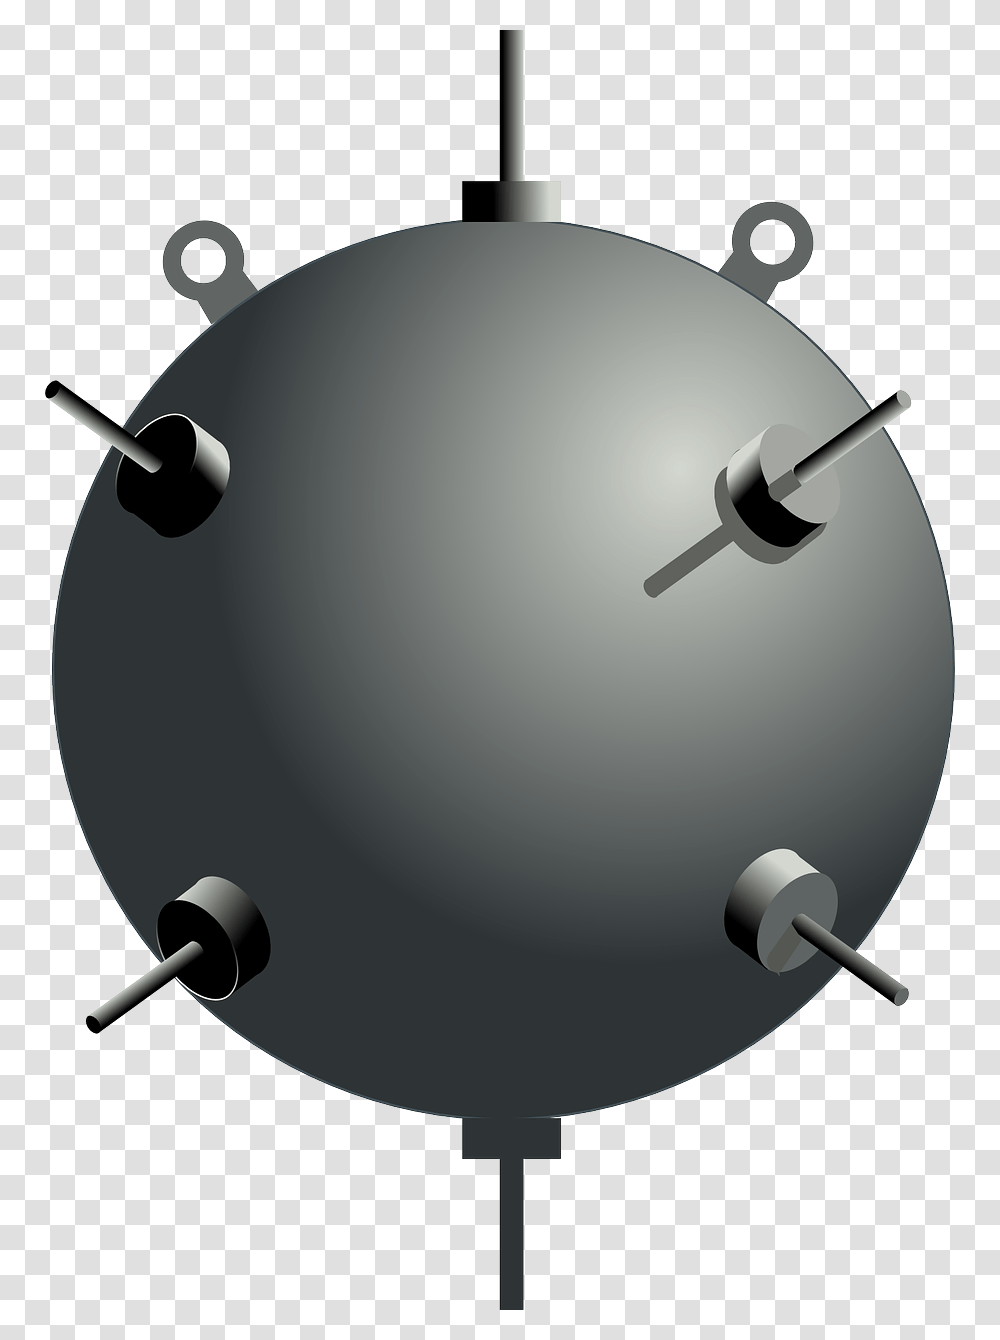 Sea Mine Clip Art, Lamp, Weapon, Weaponry, Gray Transparent Png